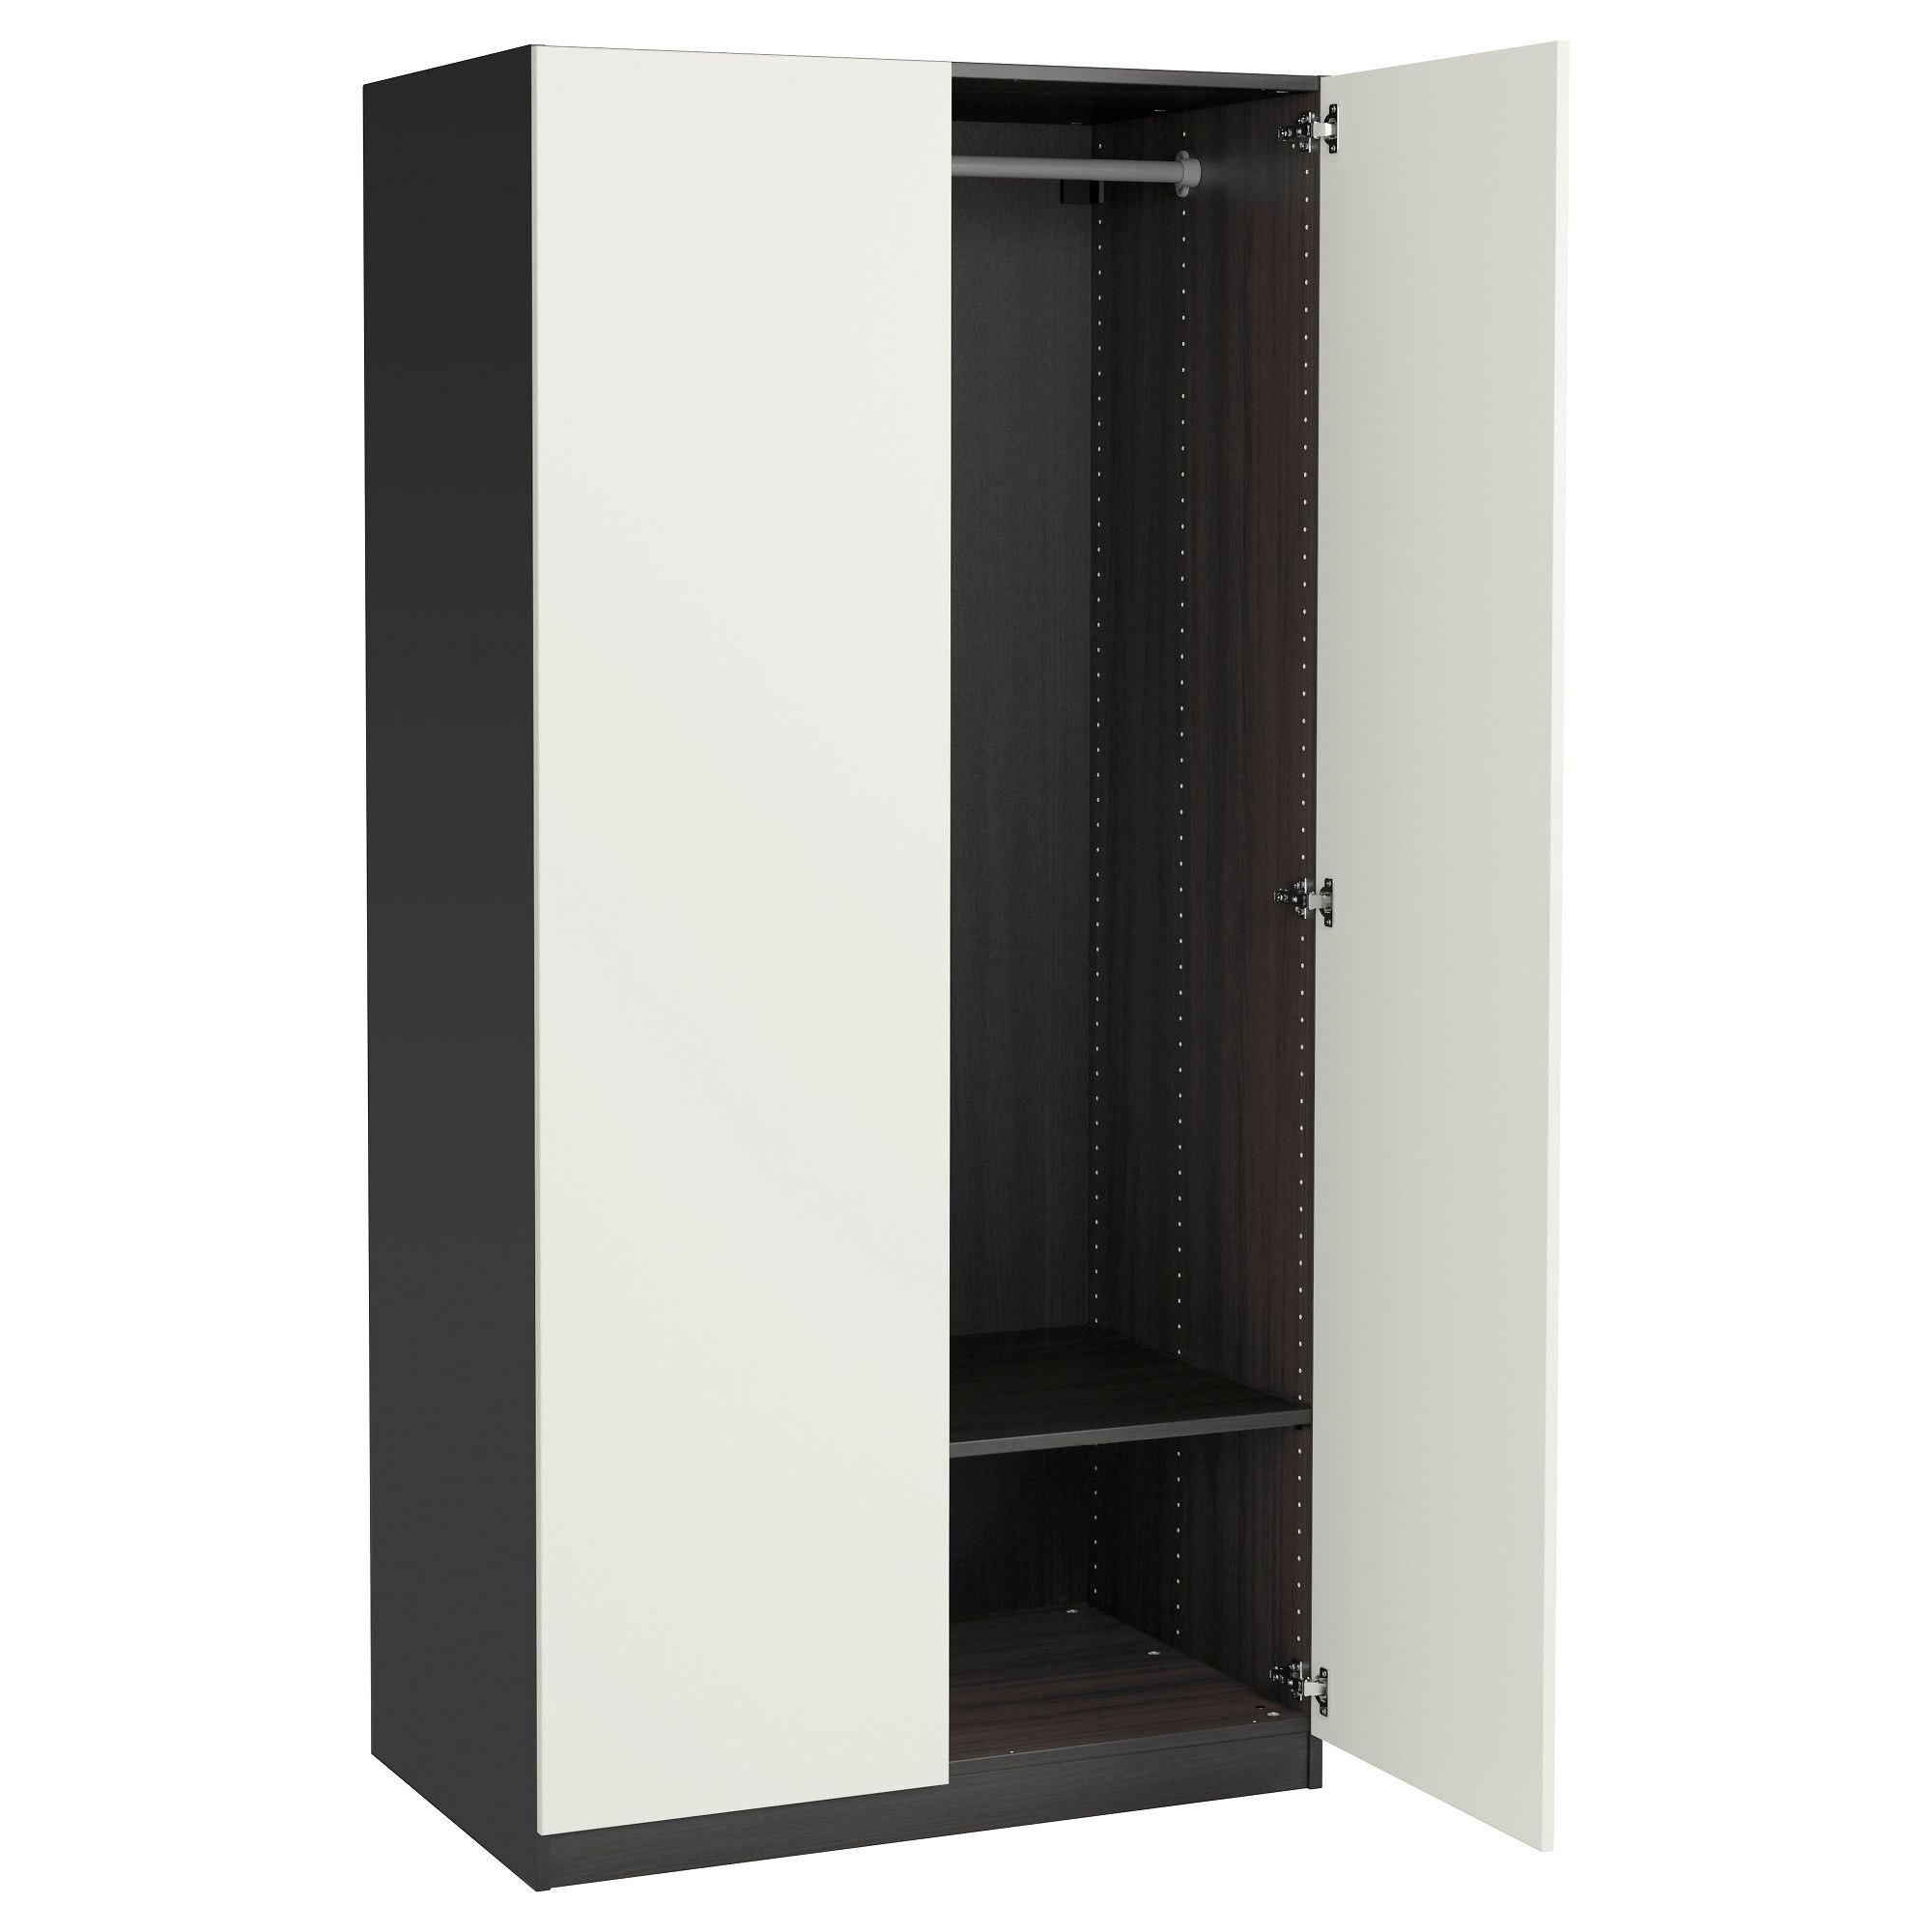 Black Wardrobes With Regard To Most Up To Date Pax Wardrobe – 39 3/8x23 5/8x79 1/4 " – Ikea (View 6 of 15)